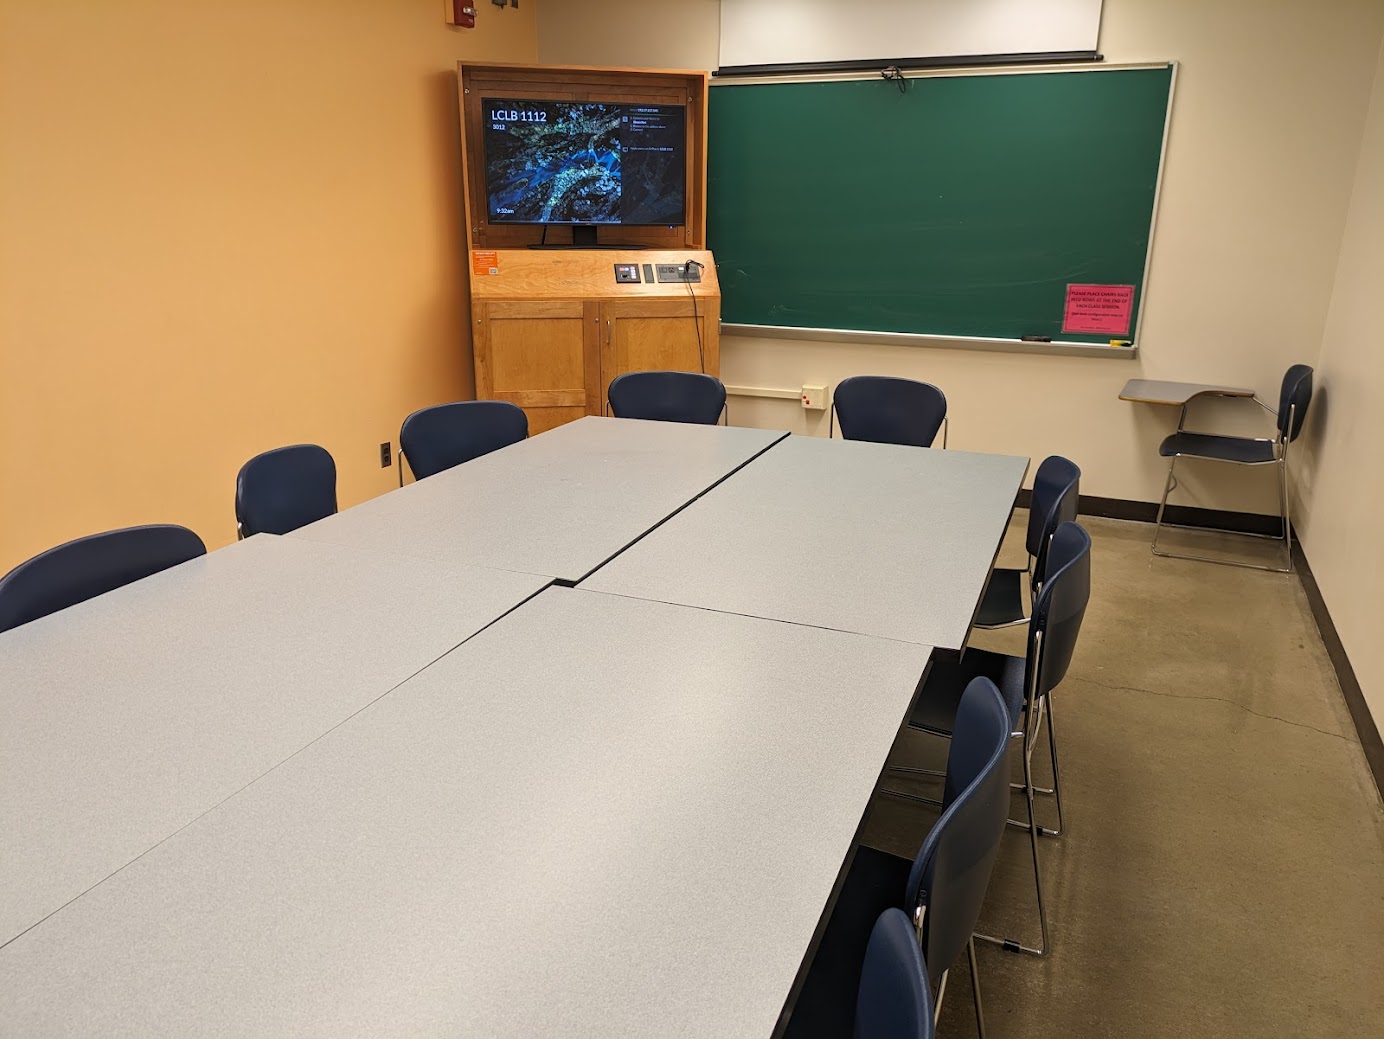 A view of the classroom with moveable tables and chairs, and chalkboard